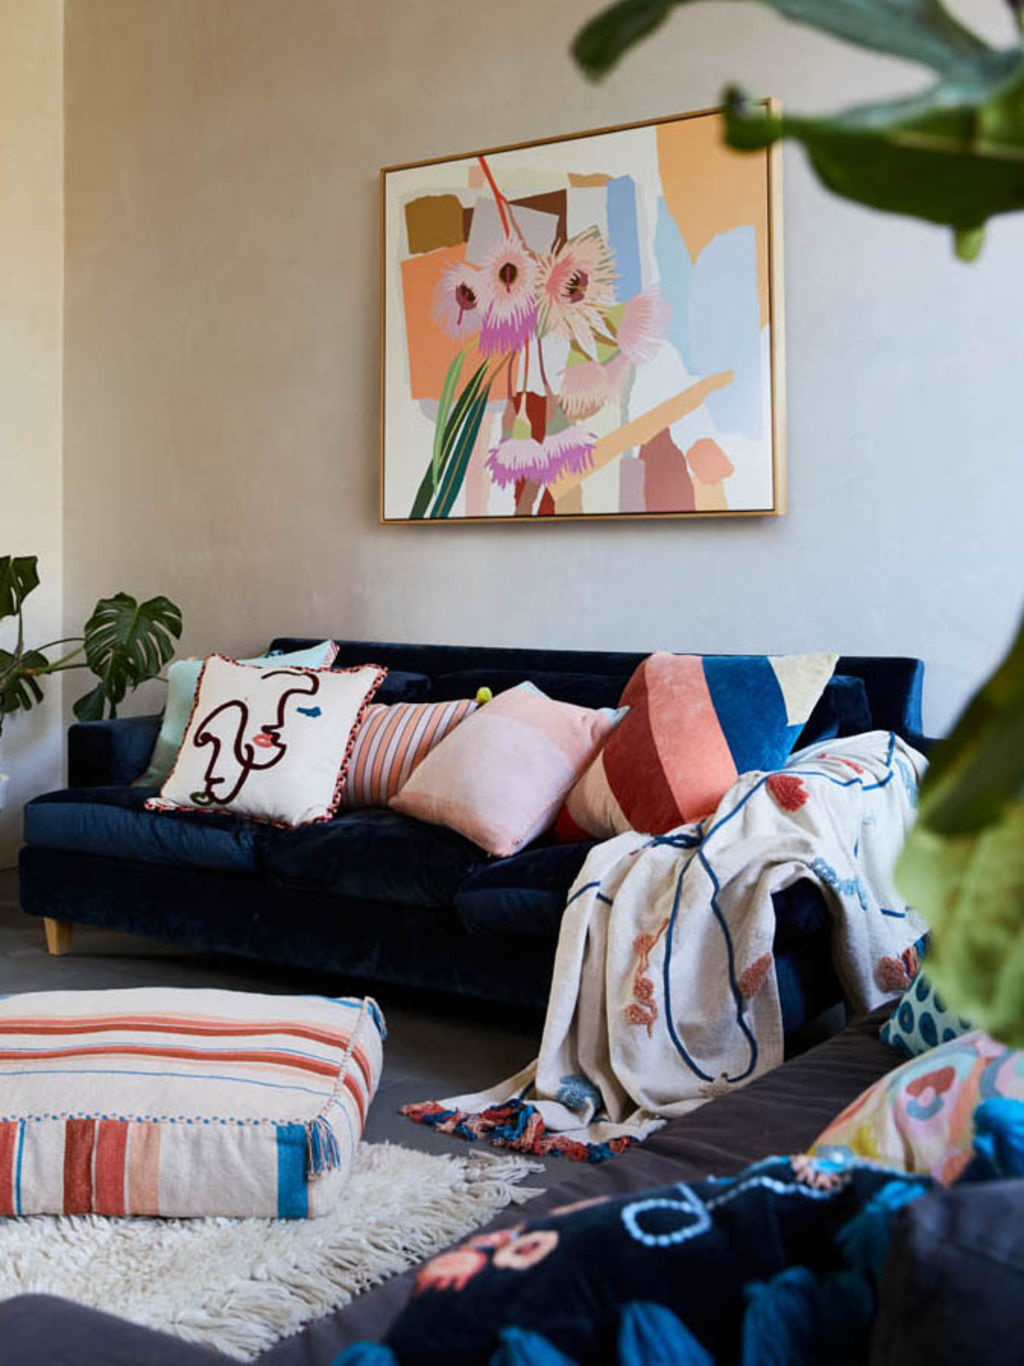 Go bold with a colourful artwork or couch. Interior styling by Justine Lanagan. Photo: Armelle Habib